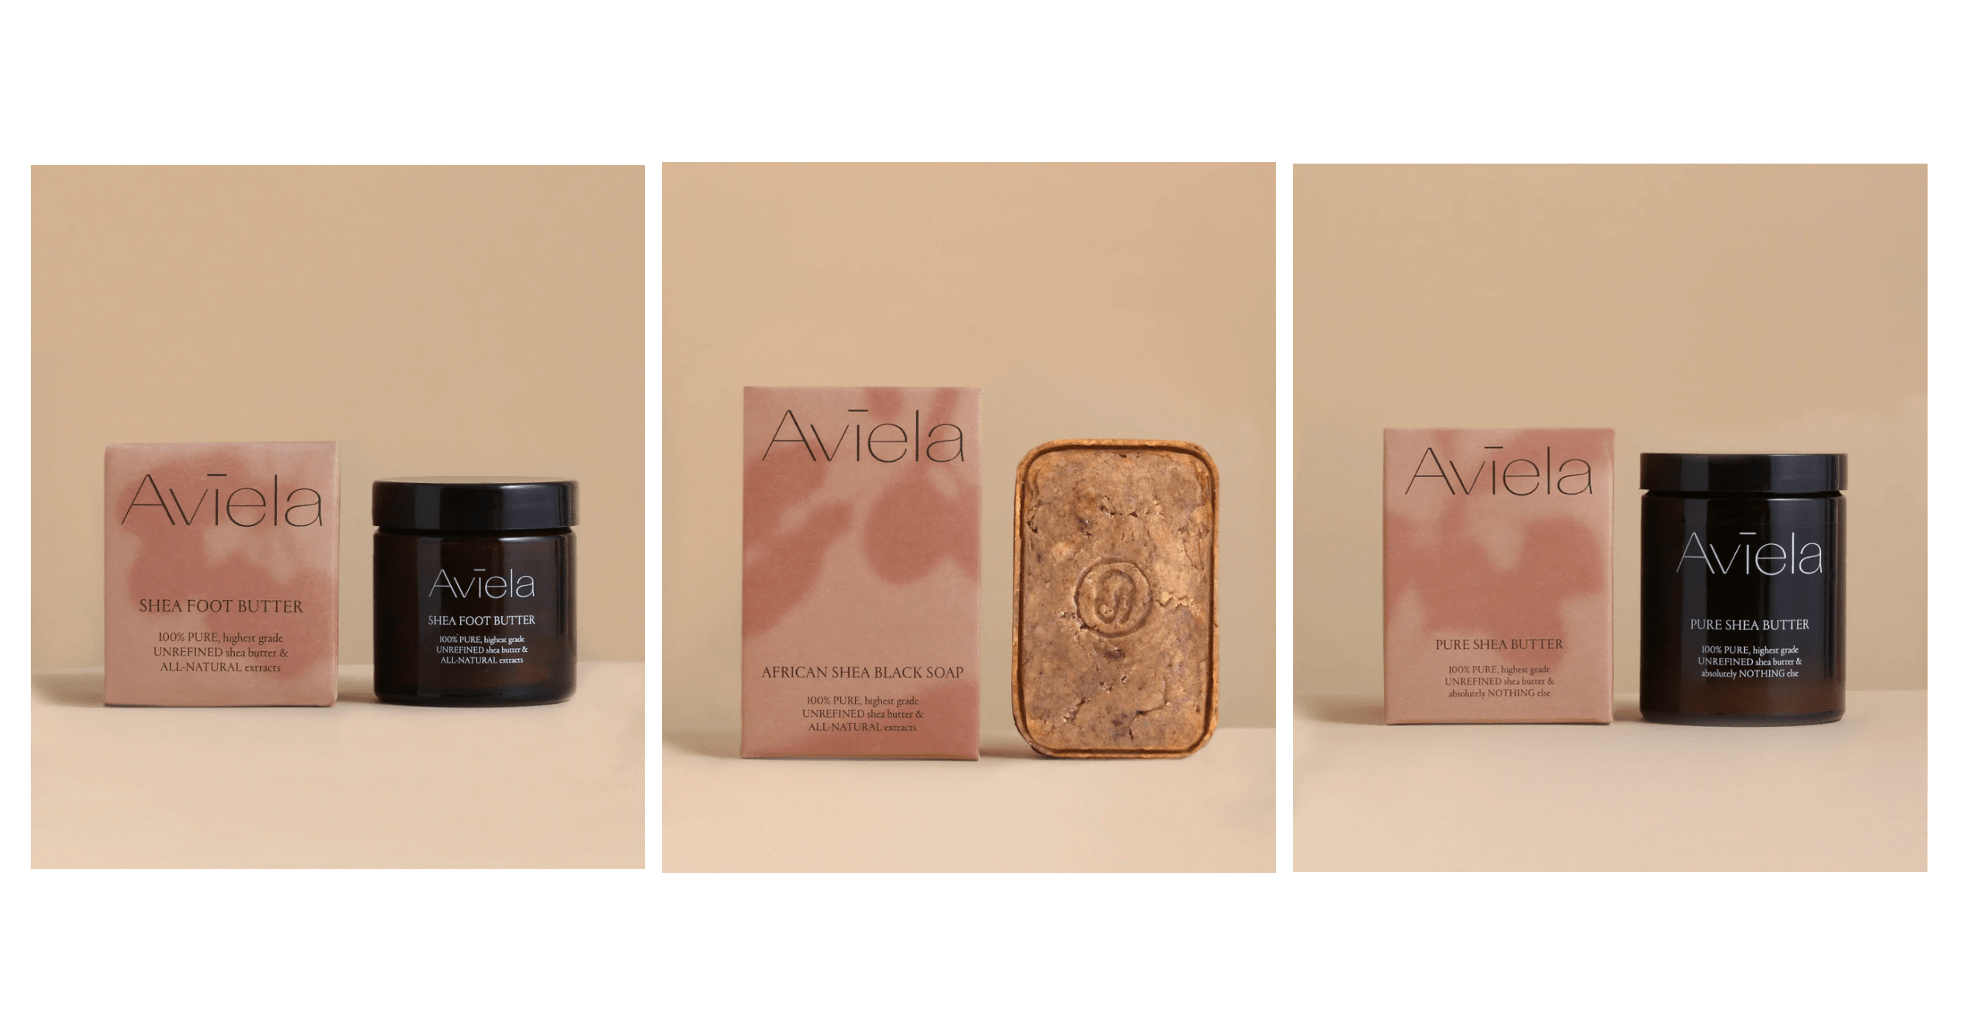 Aviela, sustainable skincare with 100% pure shea butter